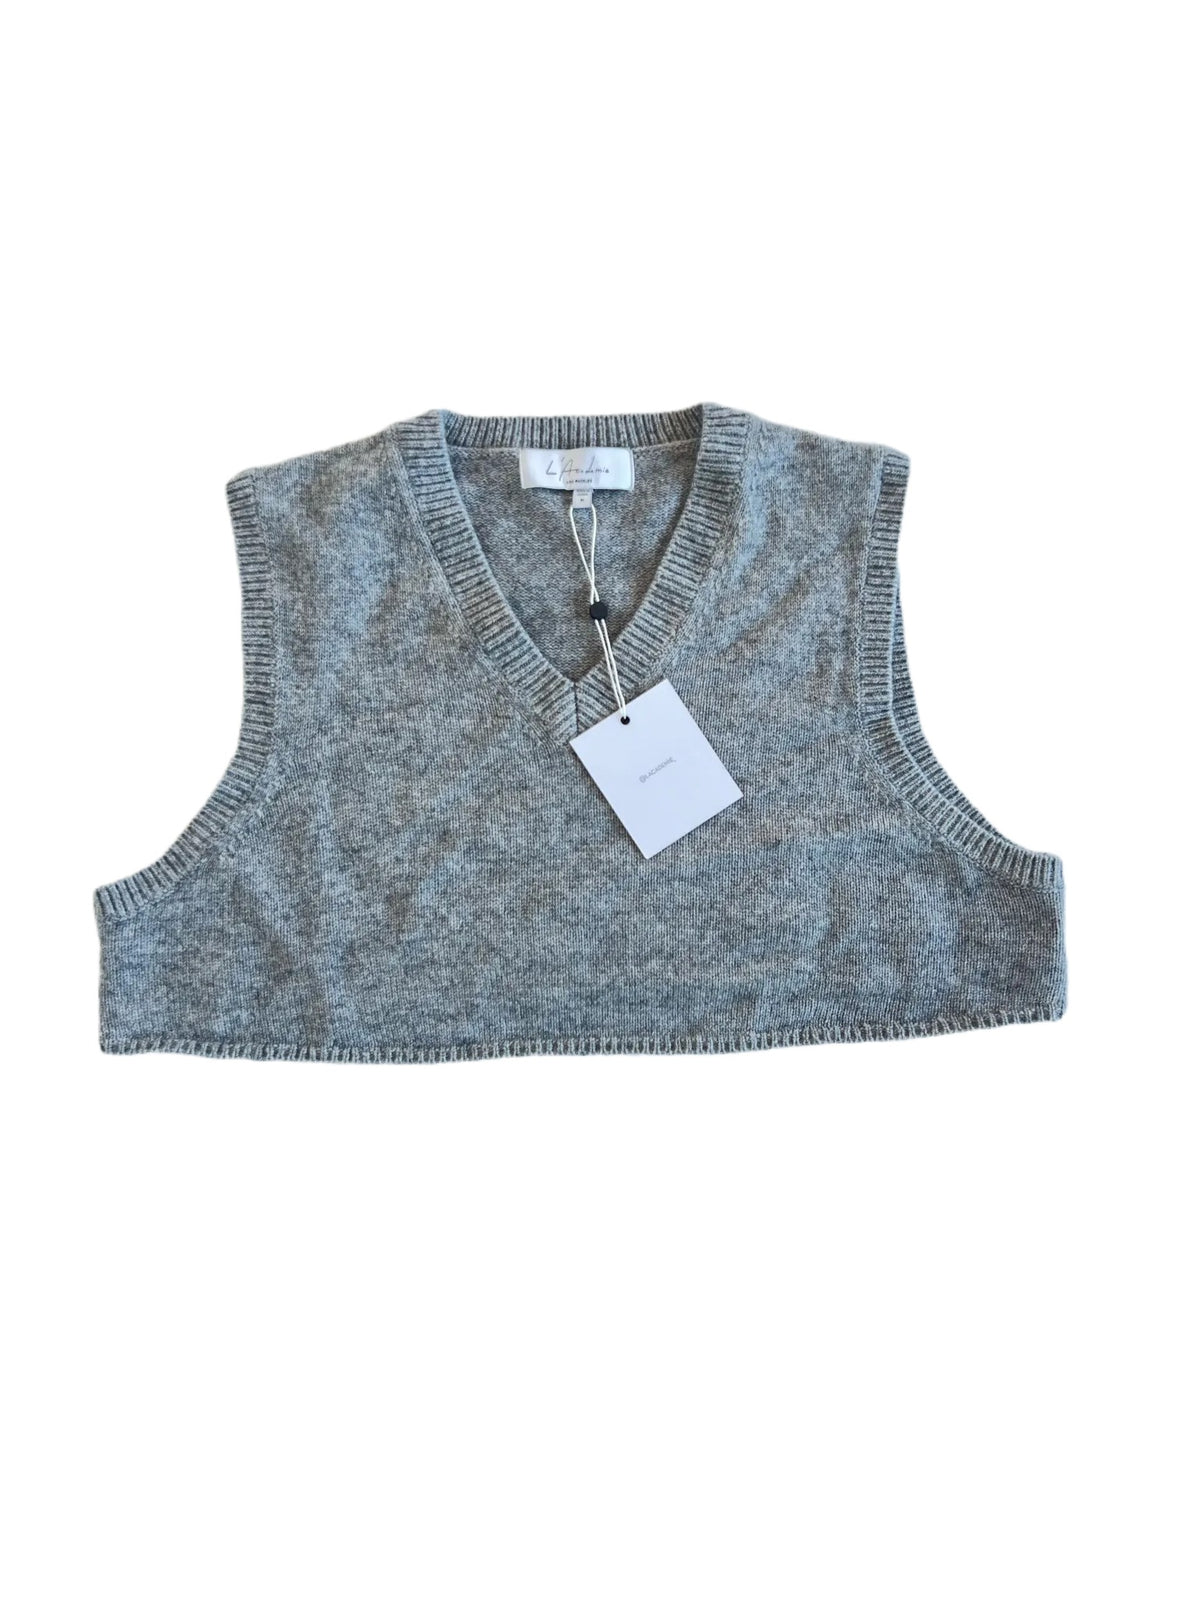 L'Academia- Grey Cropped Sweater Vest NEW WITH TAGS!